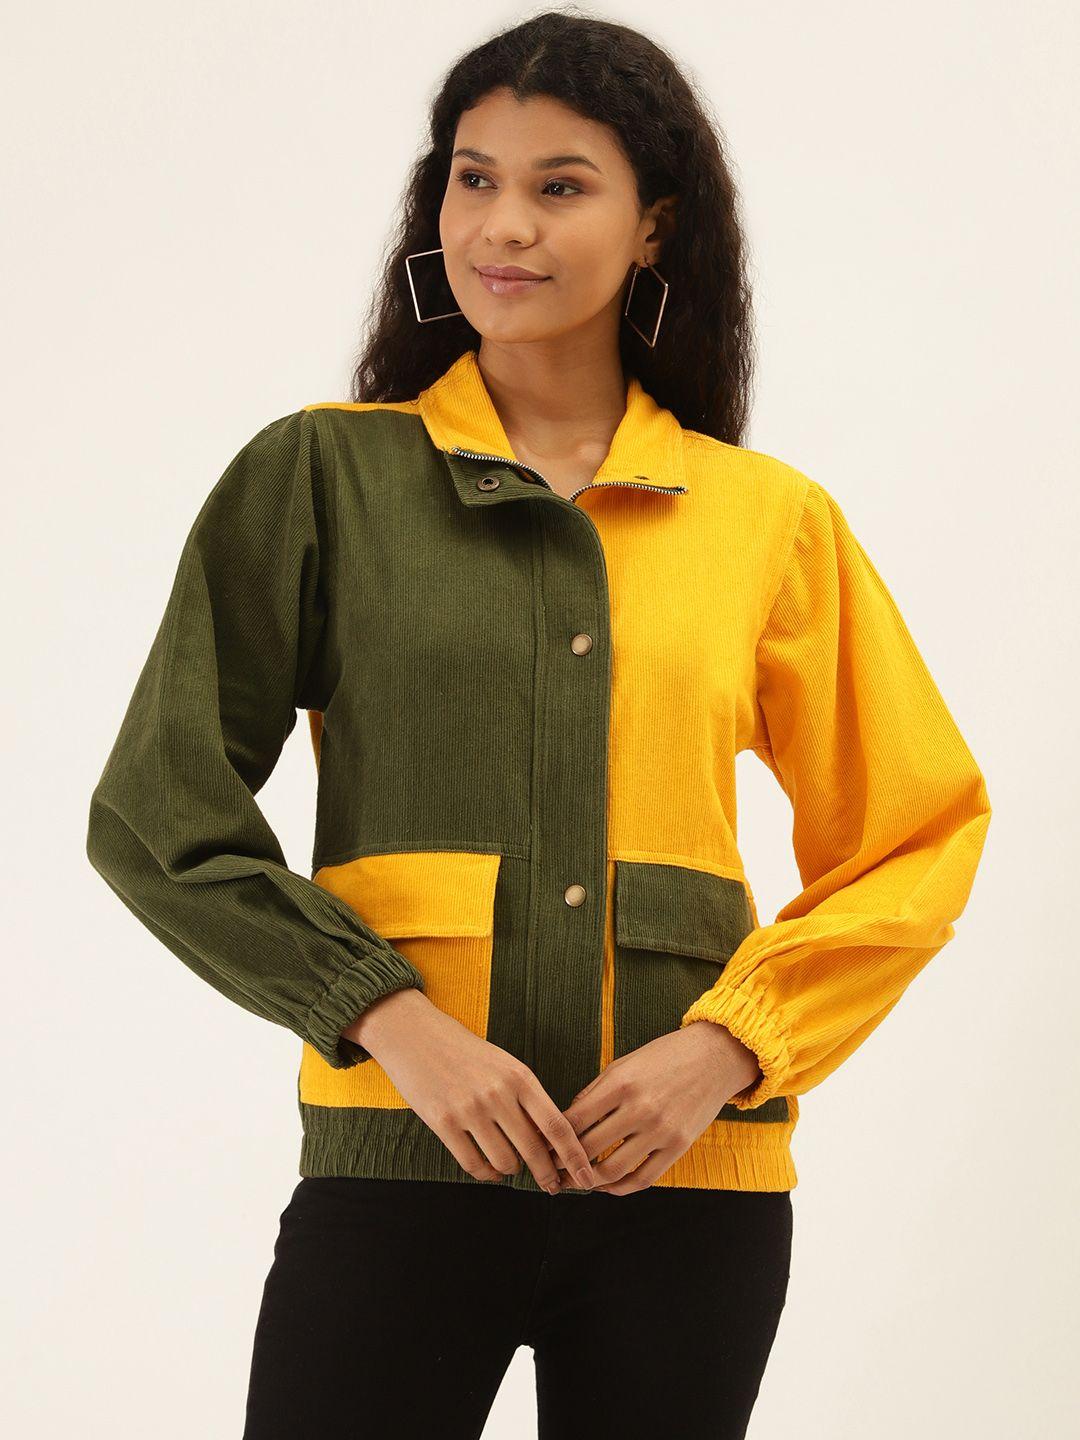 the dry state women olive green & yellow colorblocked open front corduroy jacket